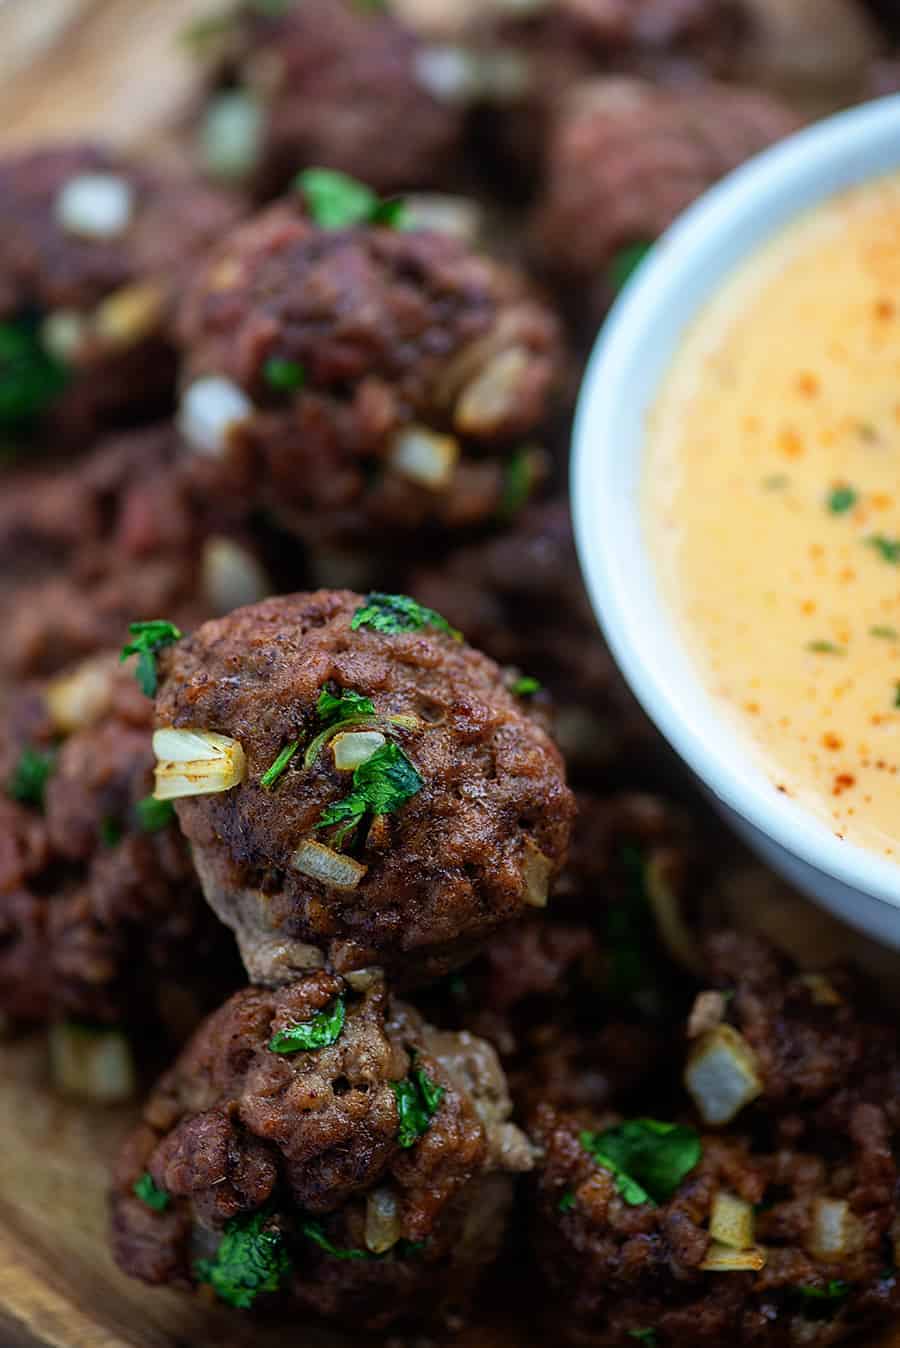 A close up of a bowl of queso dip next to meatballs